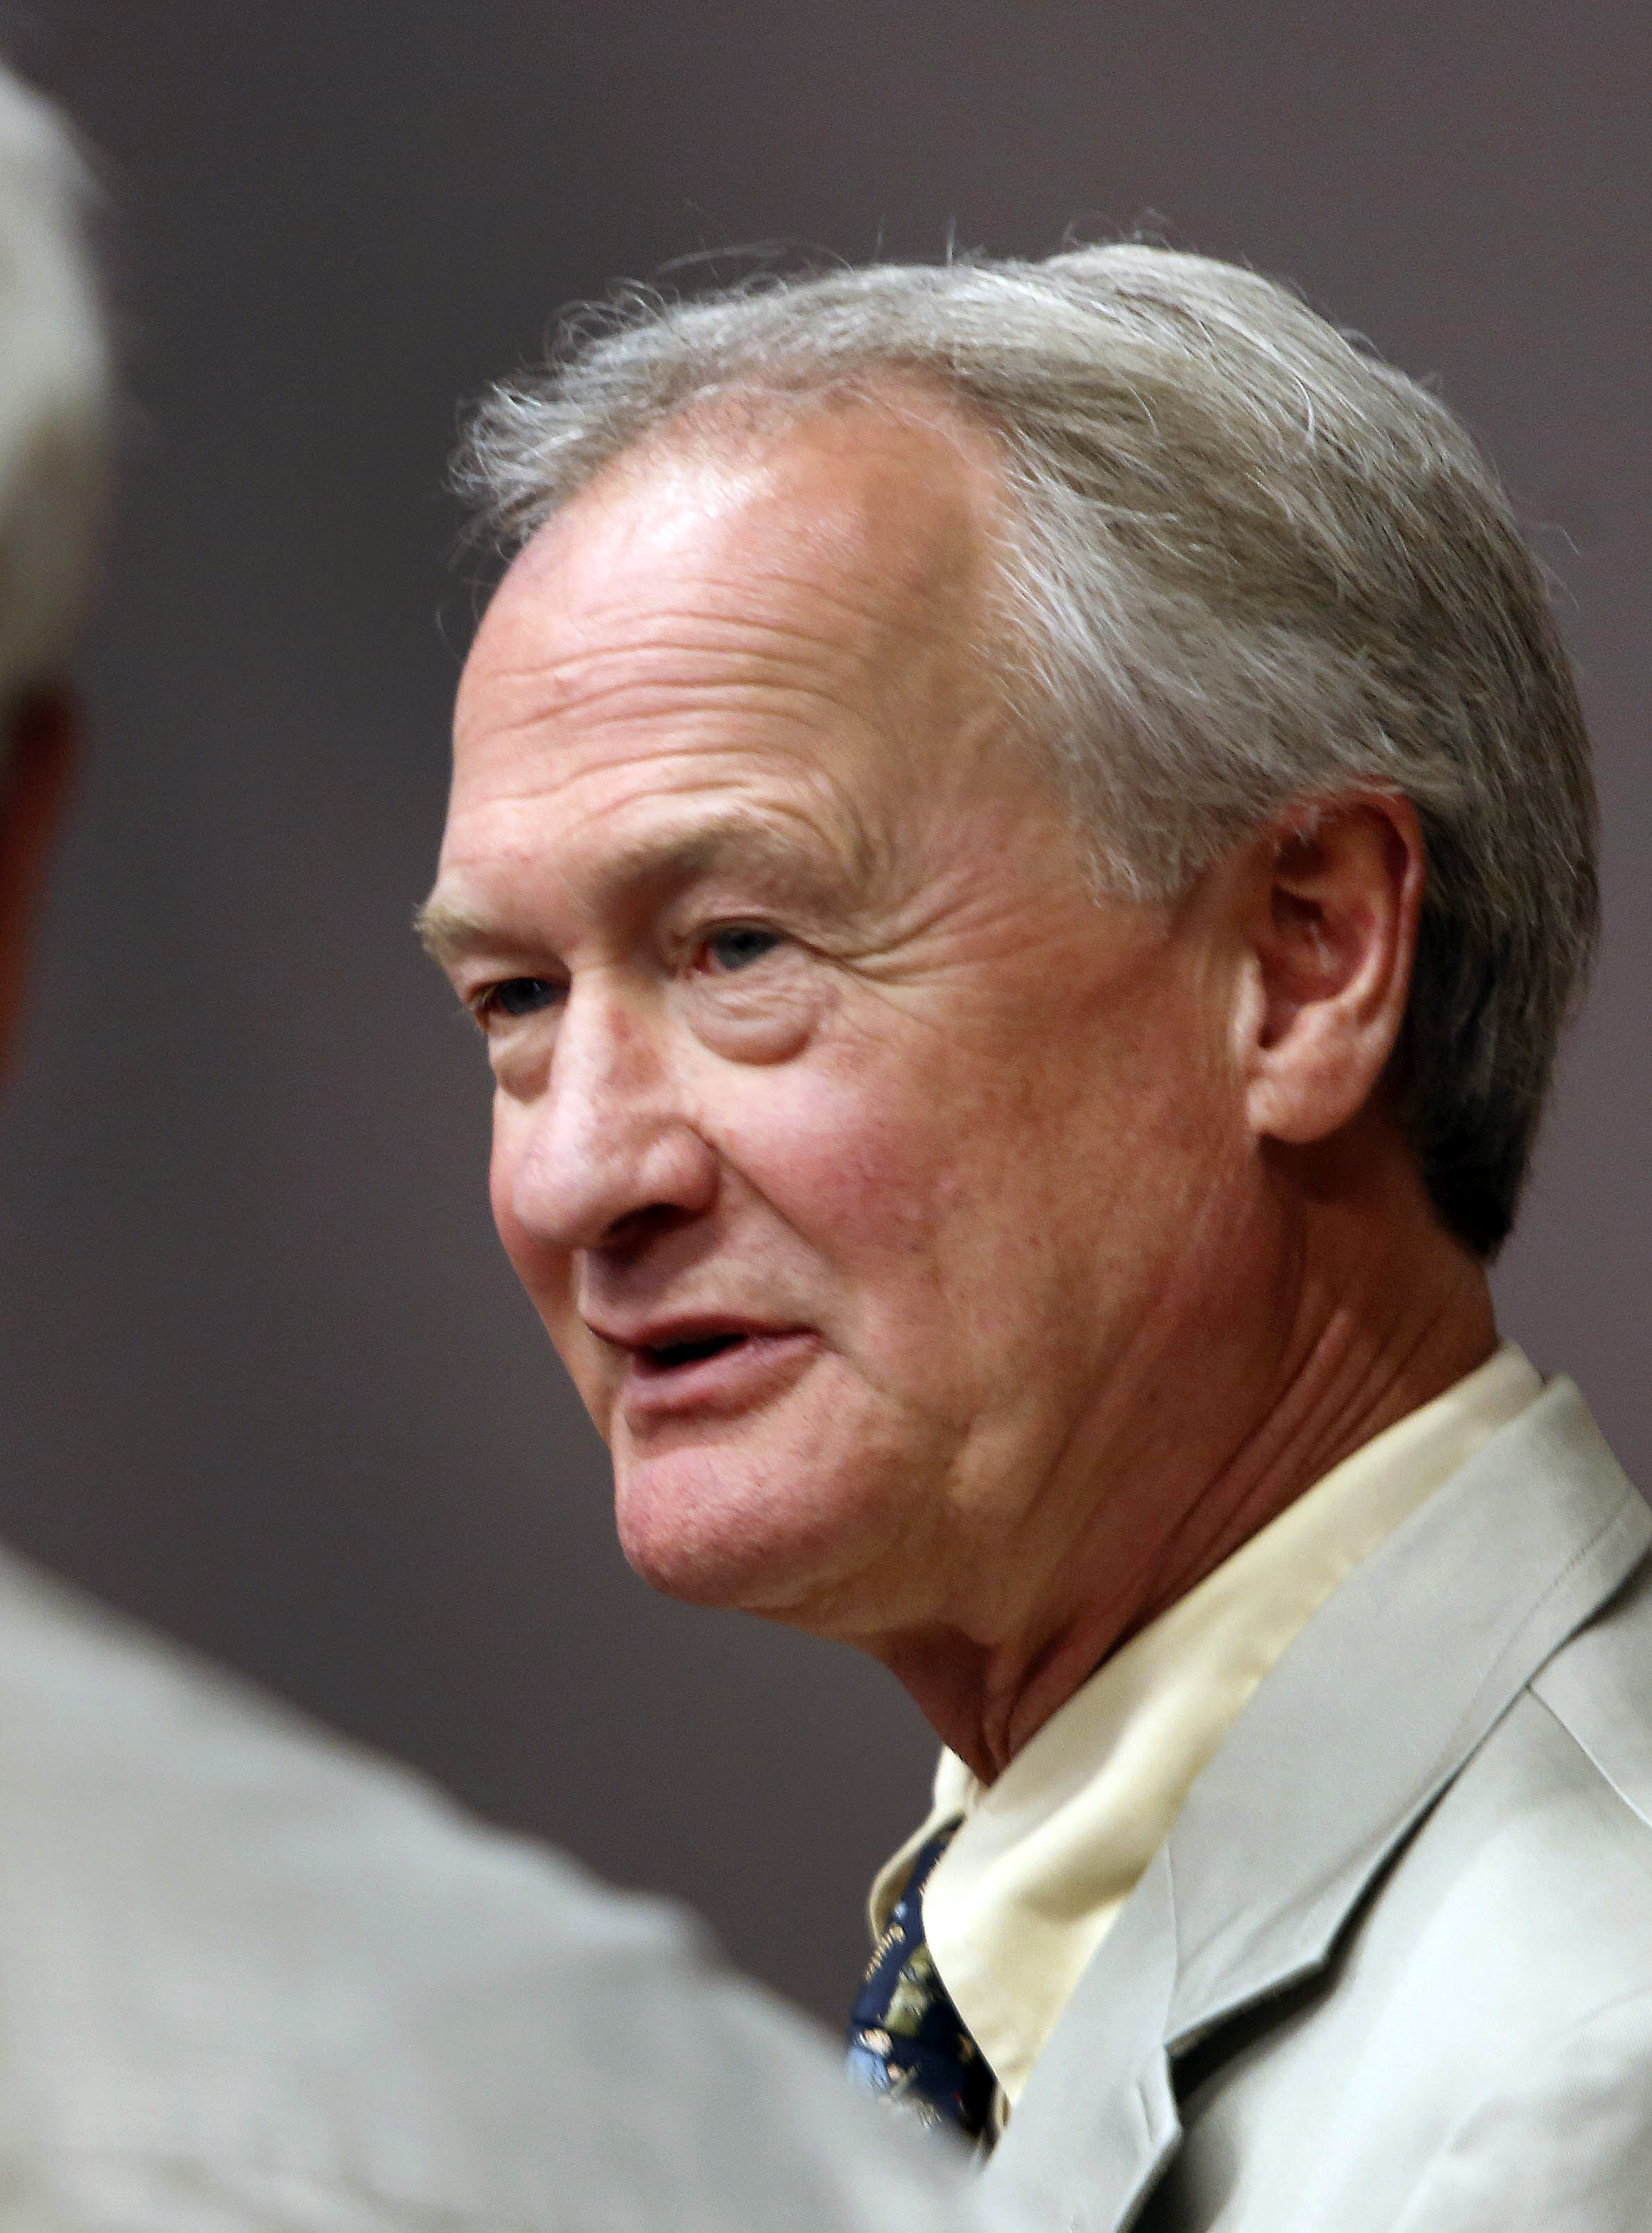 Democratic presidential candidate former Rhode Island Gov. Lincoln Chafee meets with voters during a campaign stop in Laconia, N.H. (Jim Cole—AP)